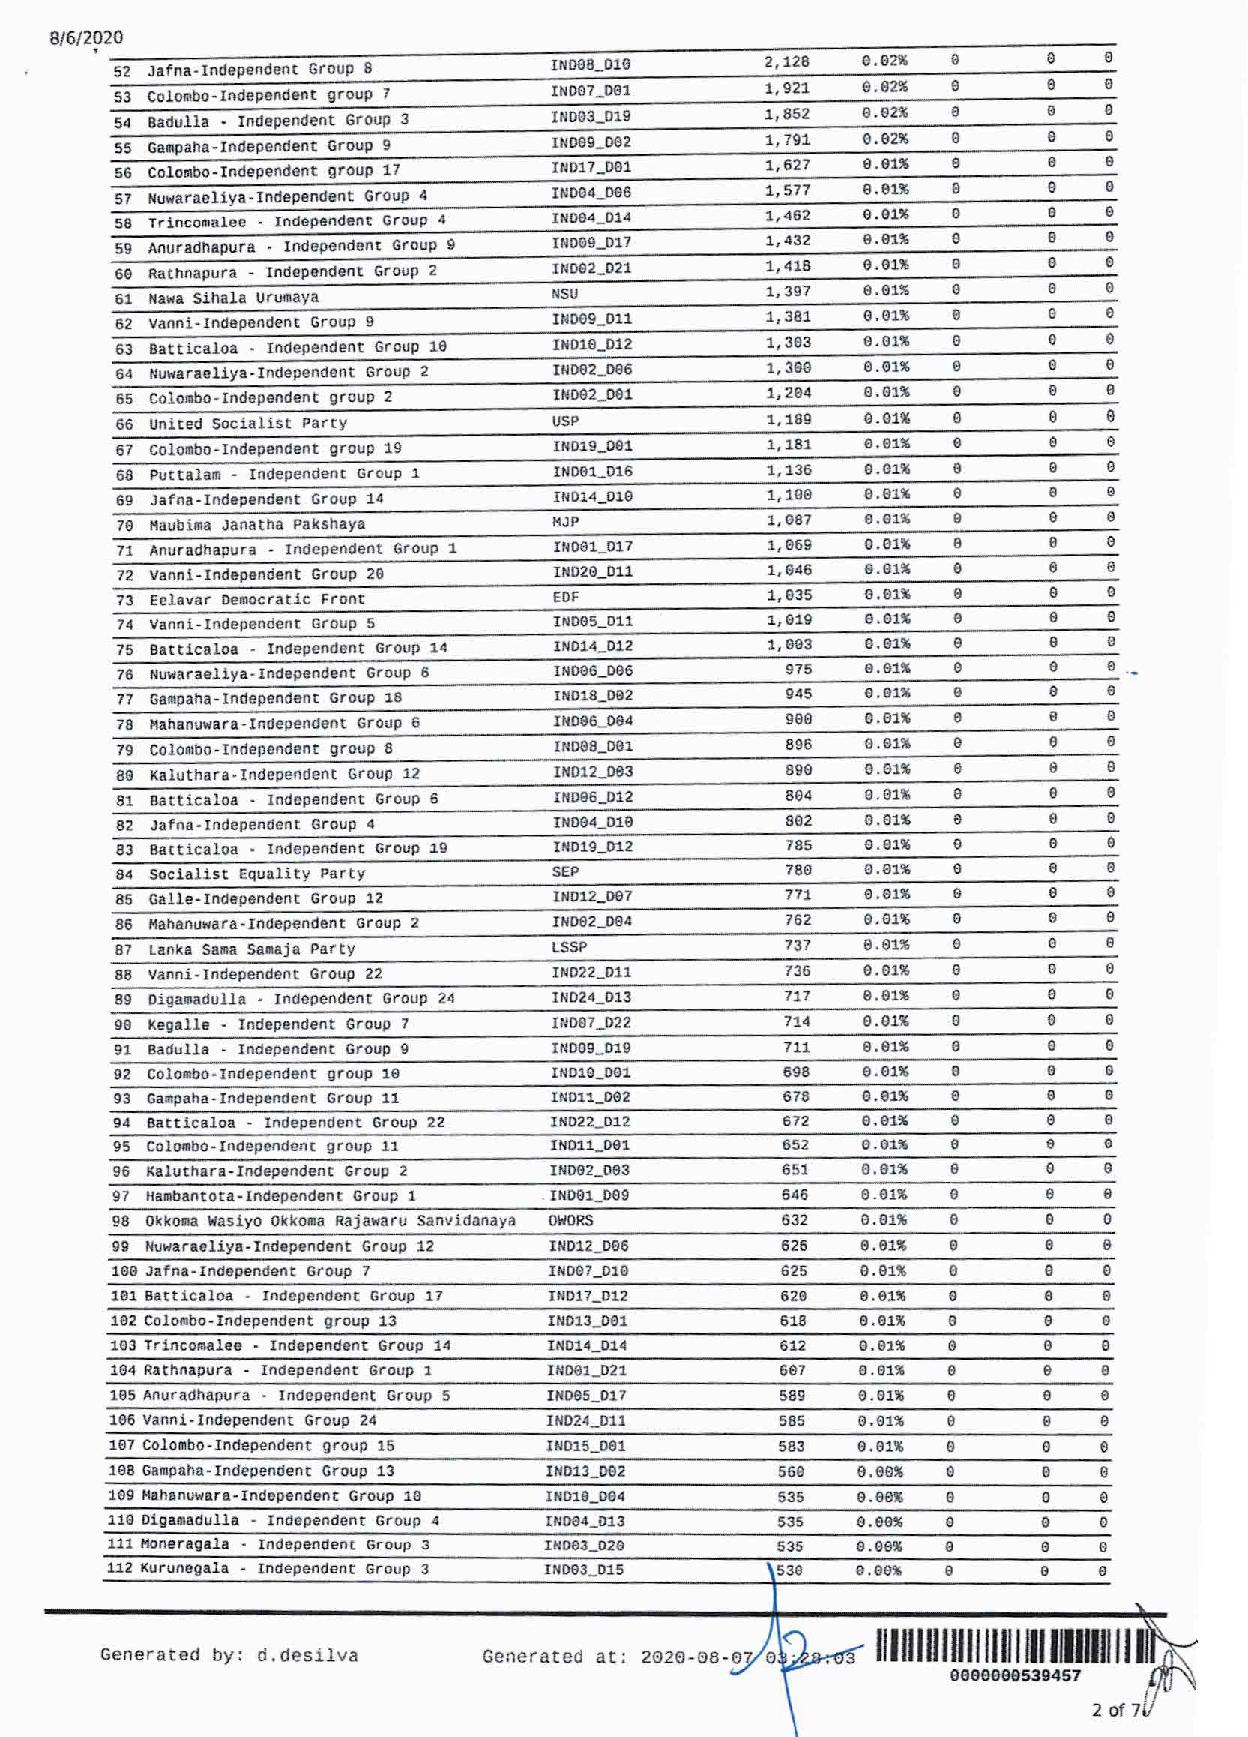 Final Votes Seats and National List min page 002